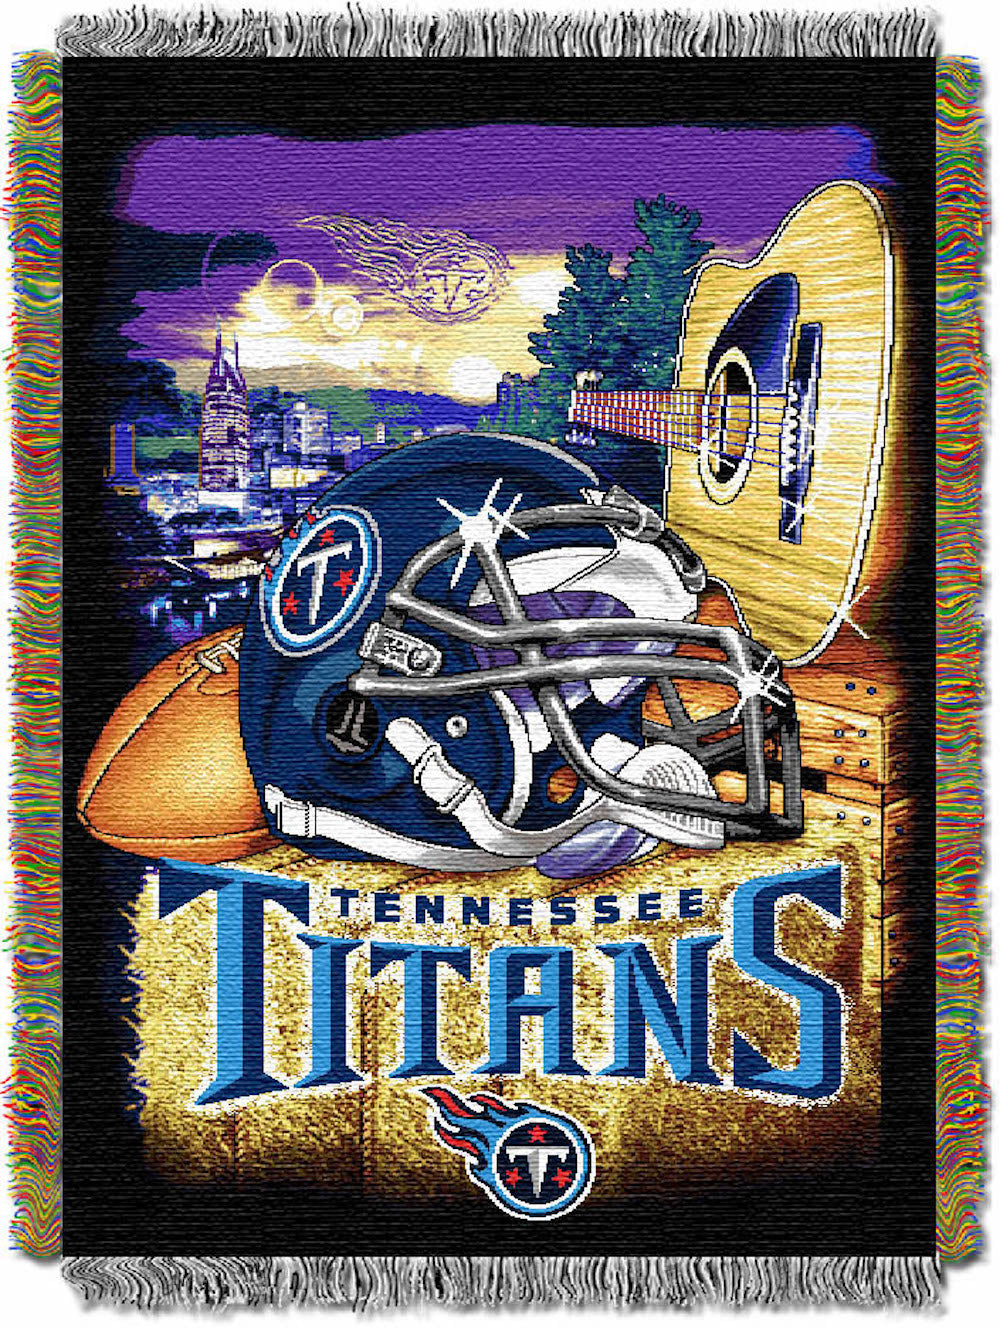 Tennessee Titans woven home field tapestry